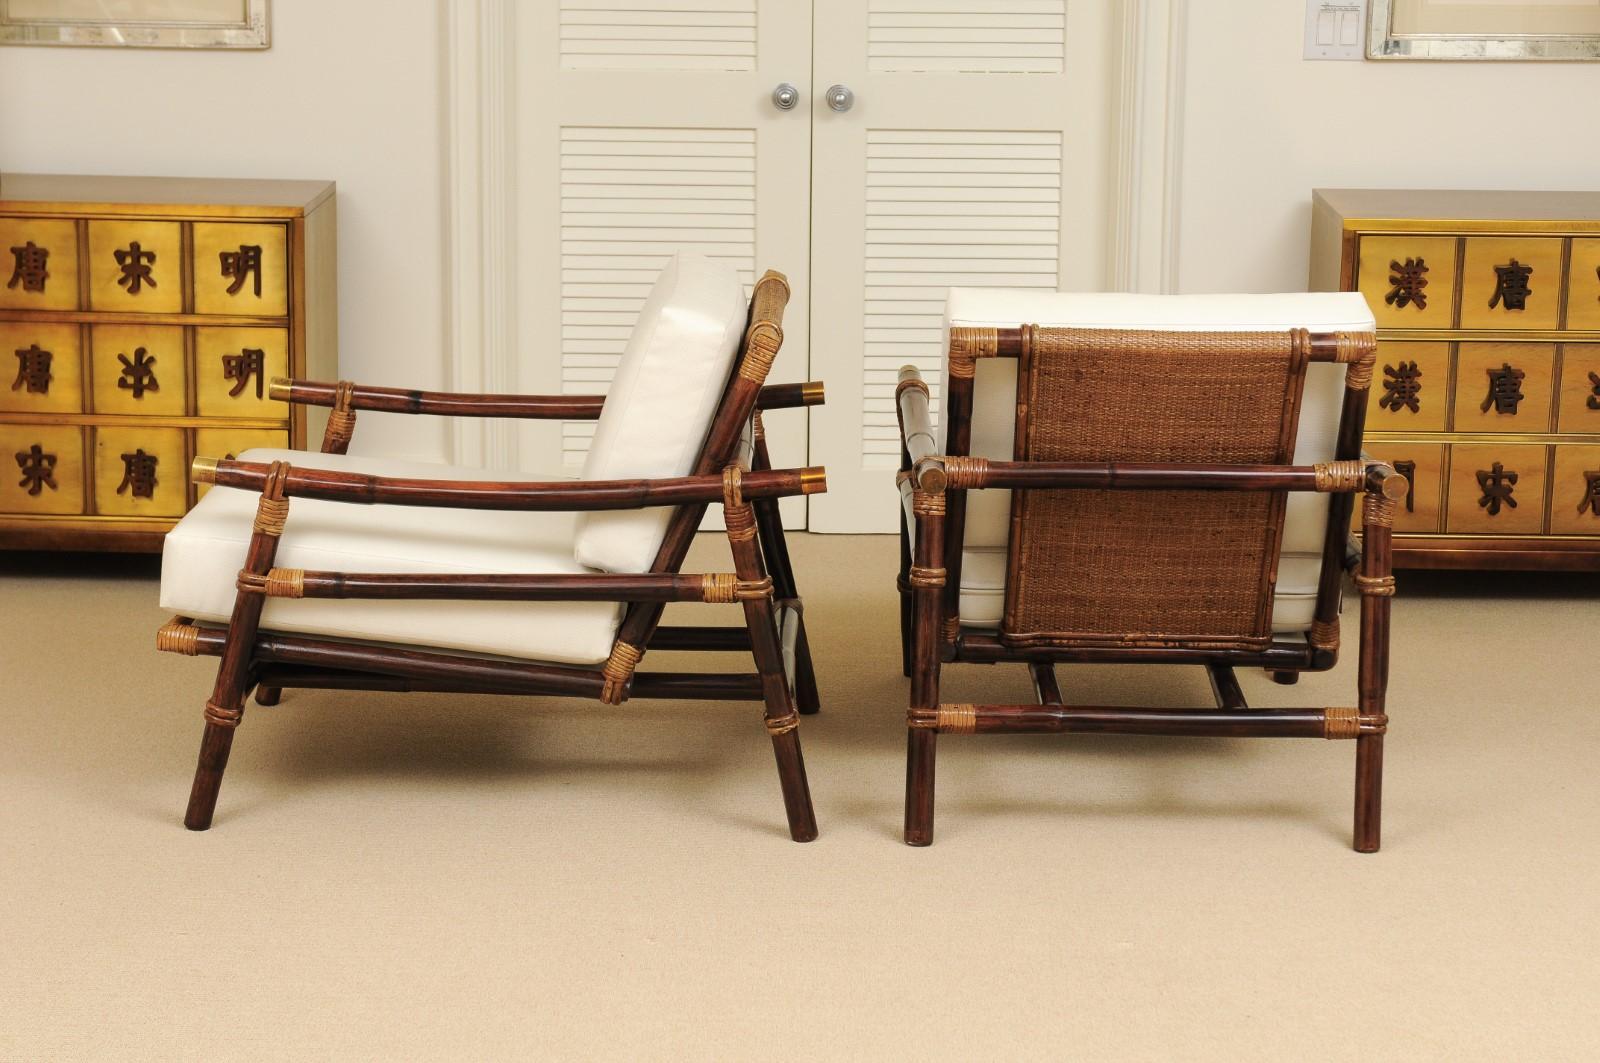 Superb Restored Pair of Campaign Loungers by Wisner for Ficks Reed, circa 1954 4